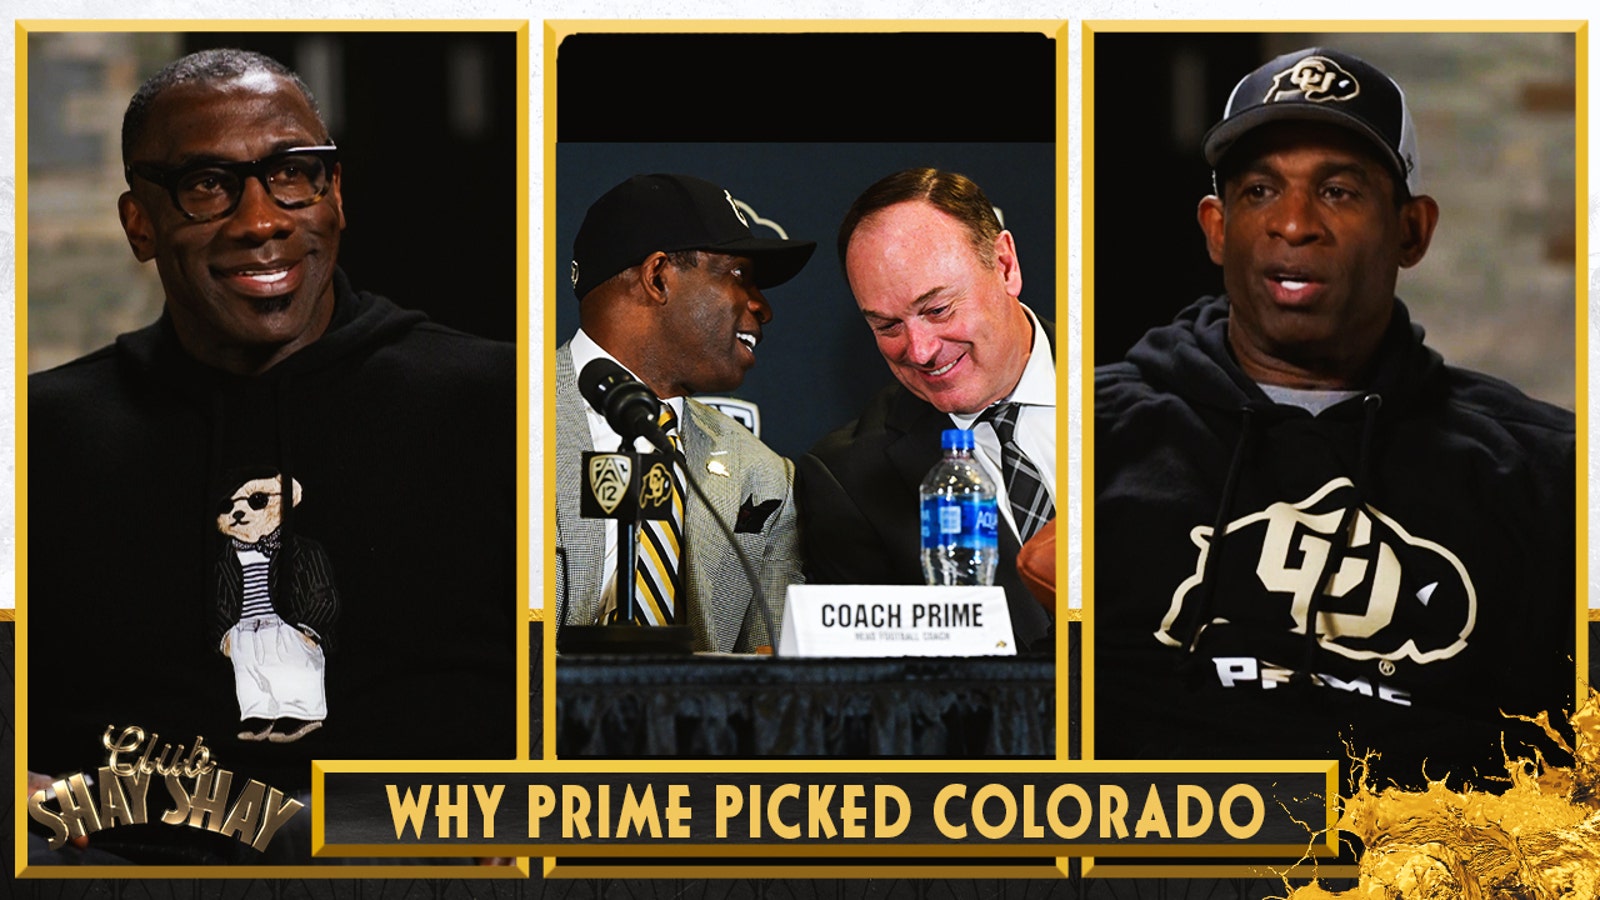 Deion Sanders explains why he picked Colorado